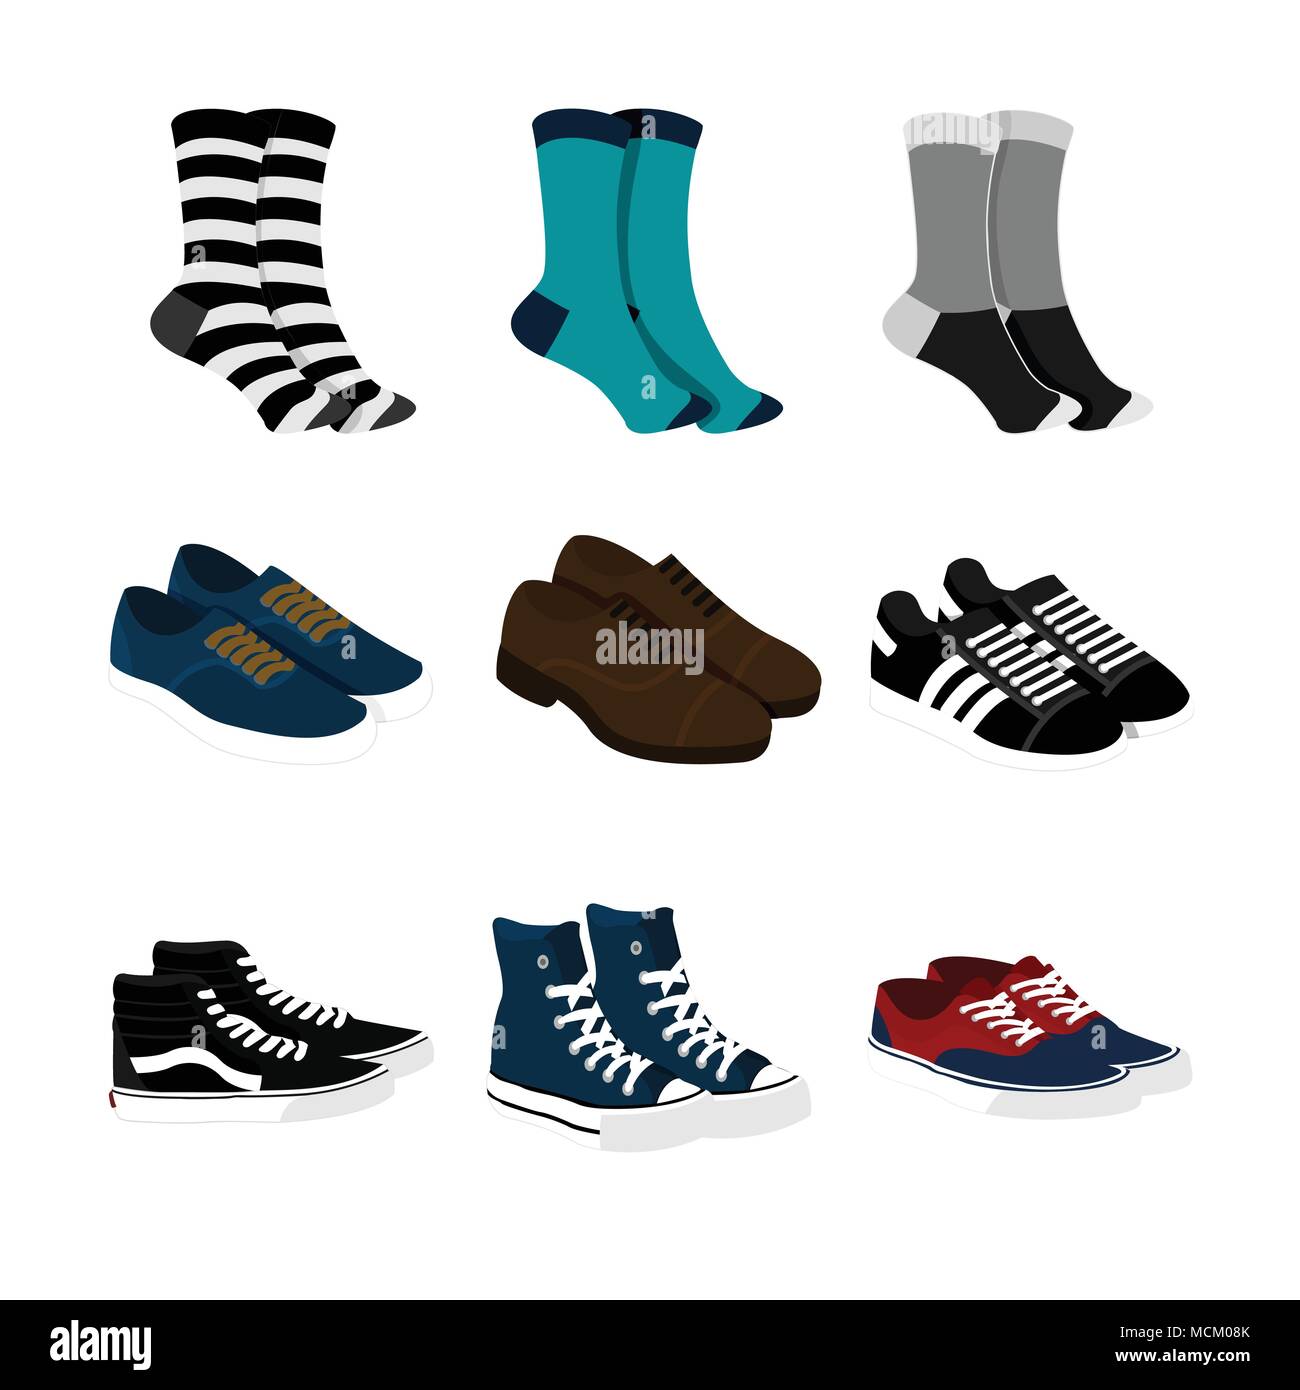 Socks And Shoes Fashion Style Item 